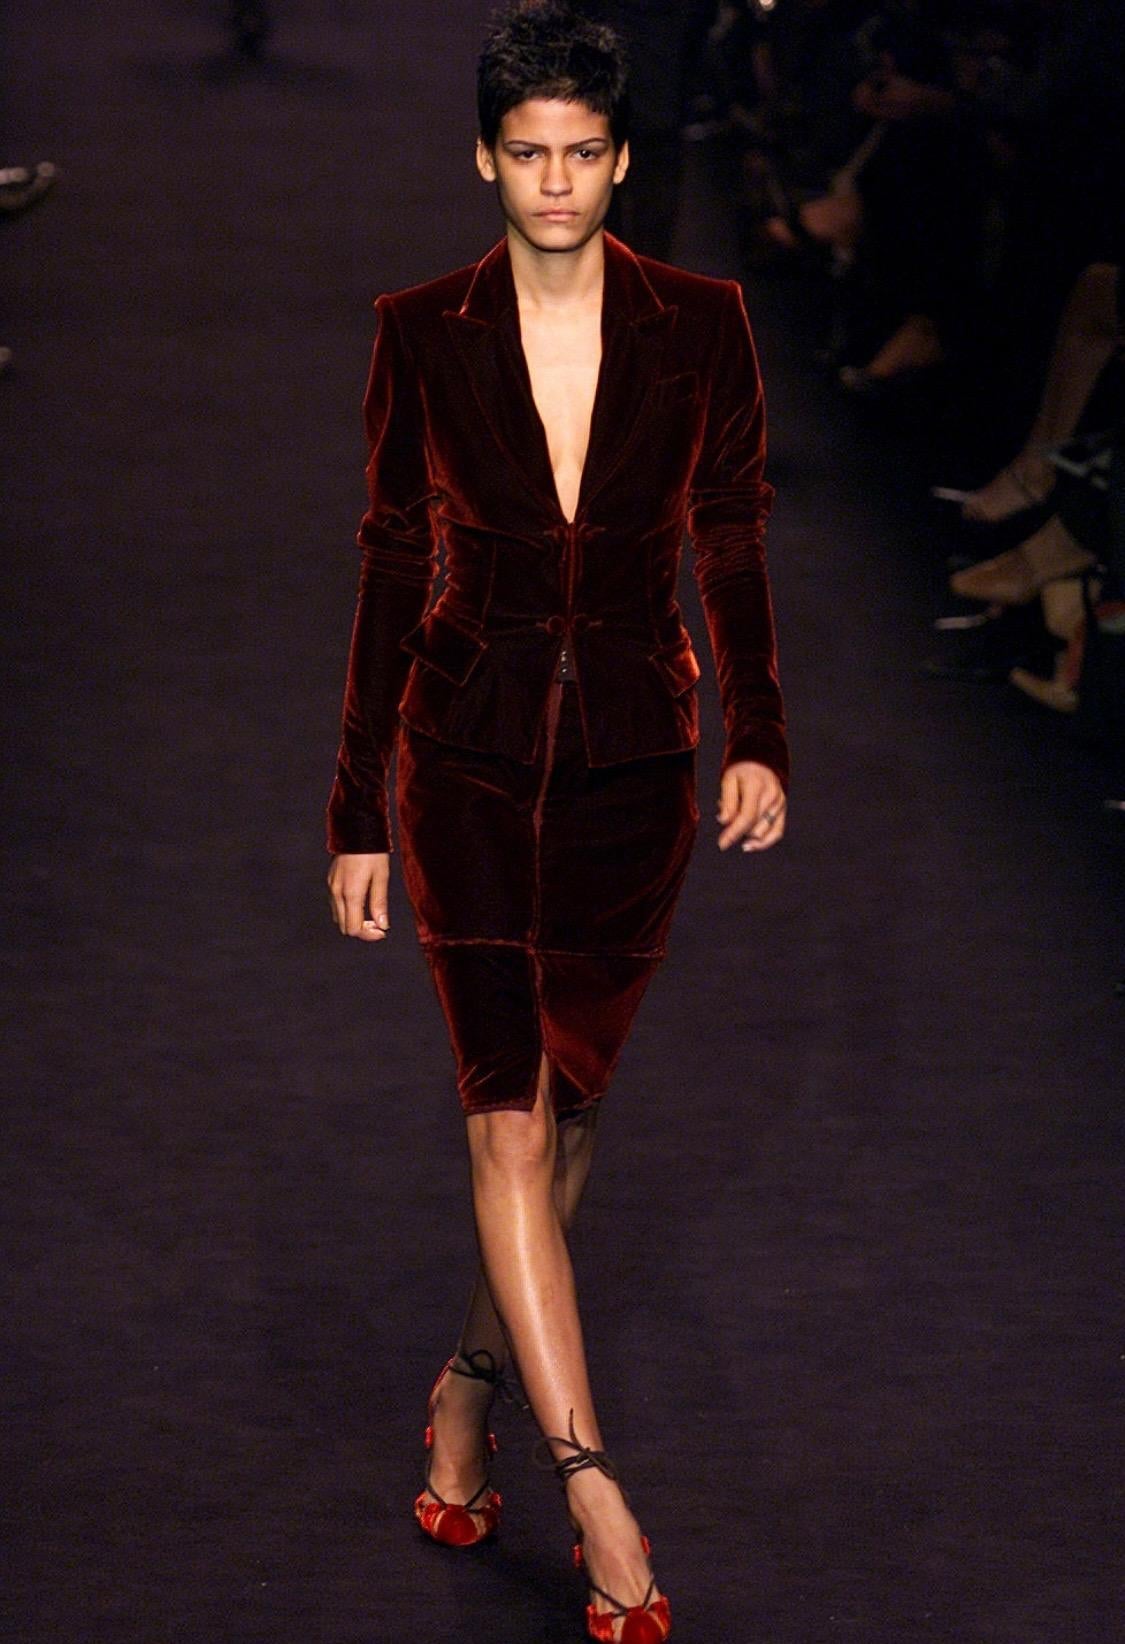 This deep red Yves Saint Laurent Rive Gauche velvet skirt suit was designed by Tom Ford for the Fall/Winter 2002 collection. This suit was presented as look 7 on that season's runway and was also seen on Julianne Moore. The silk-lined blazer